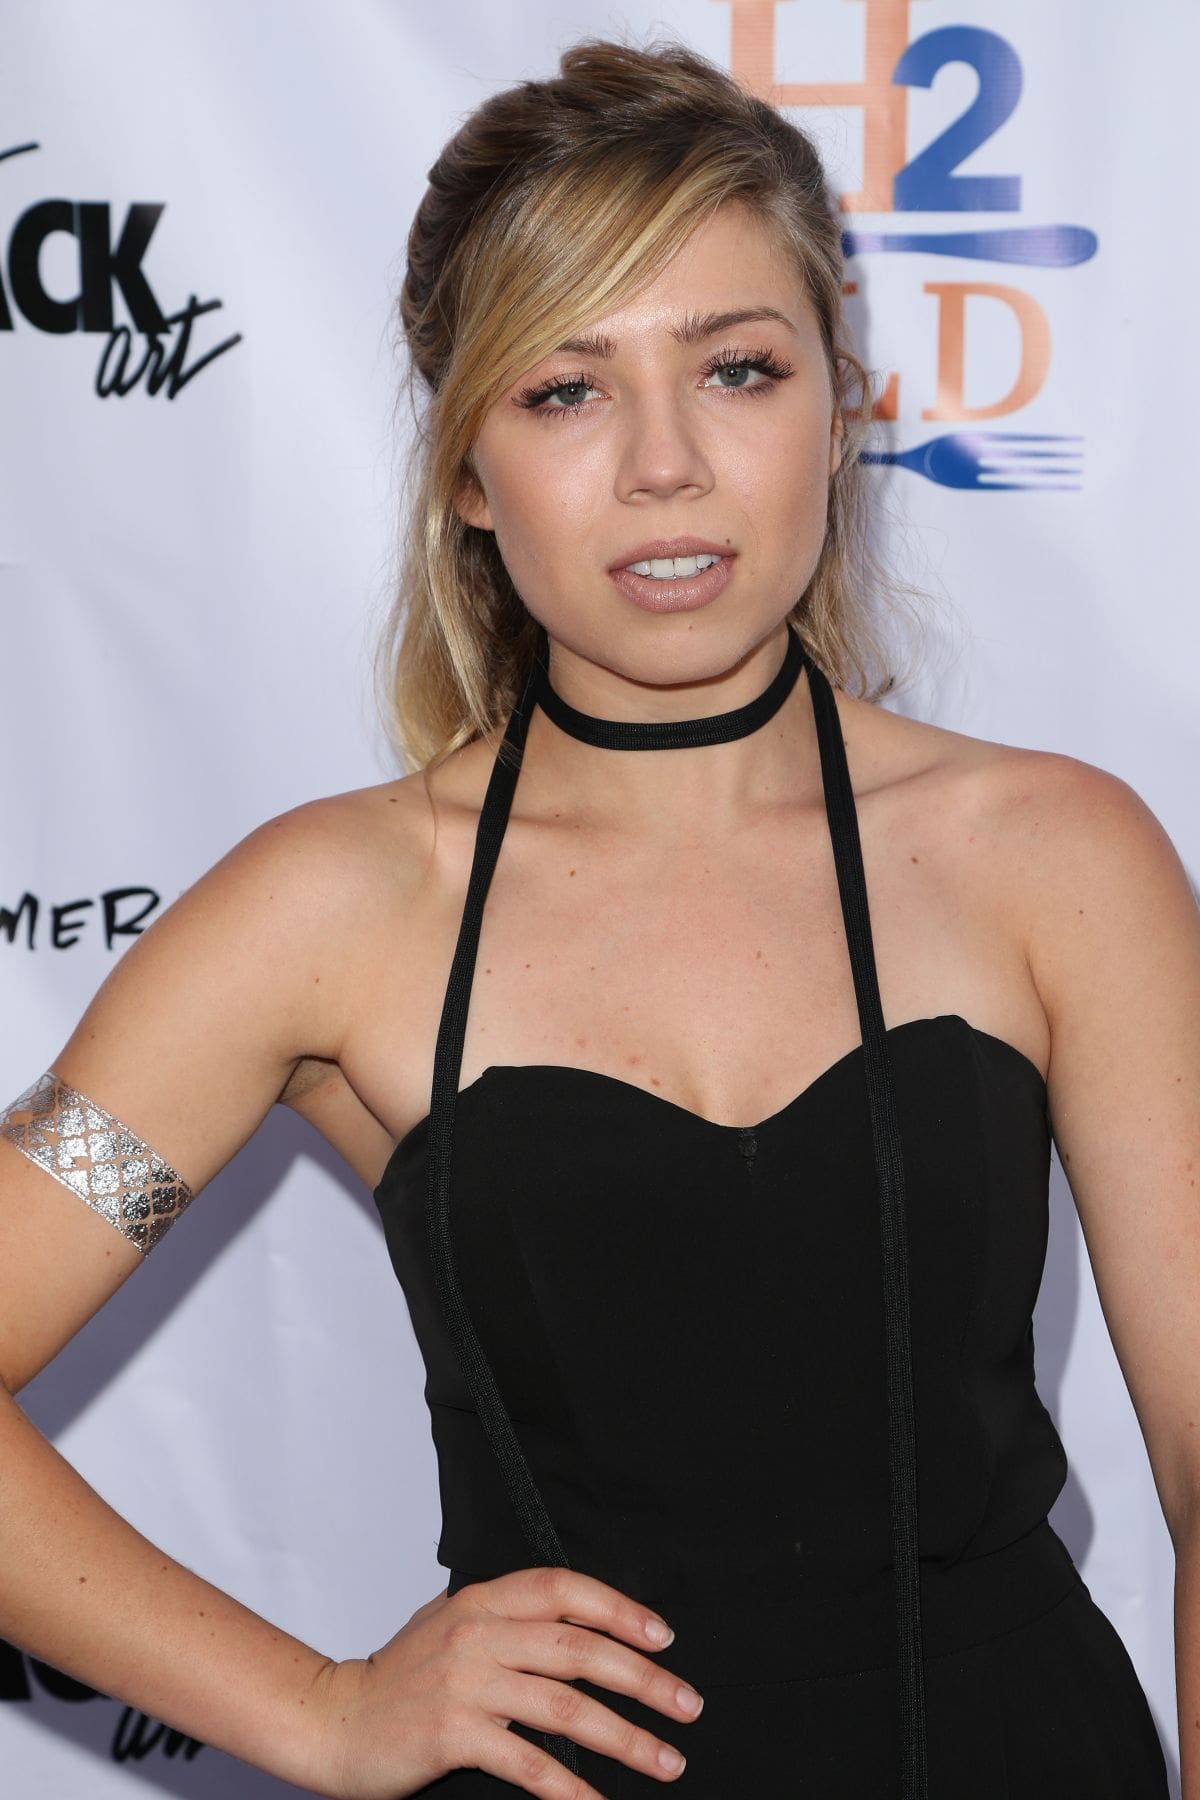 jennette mccurdy cleavages pics (2)